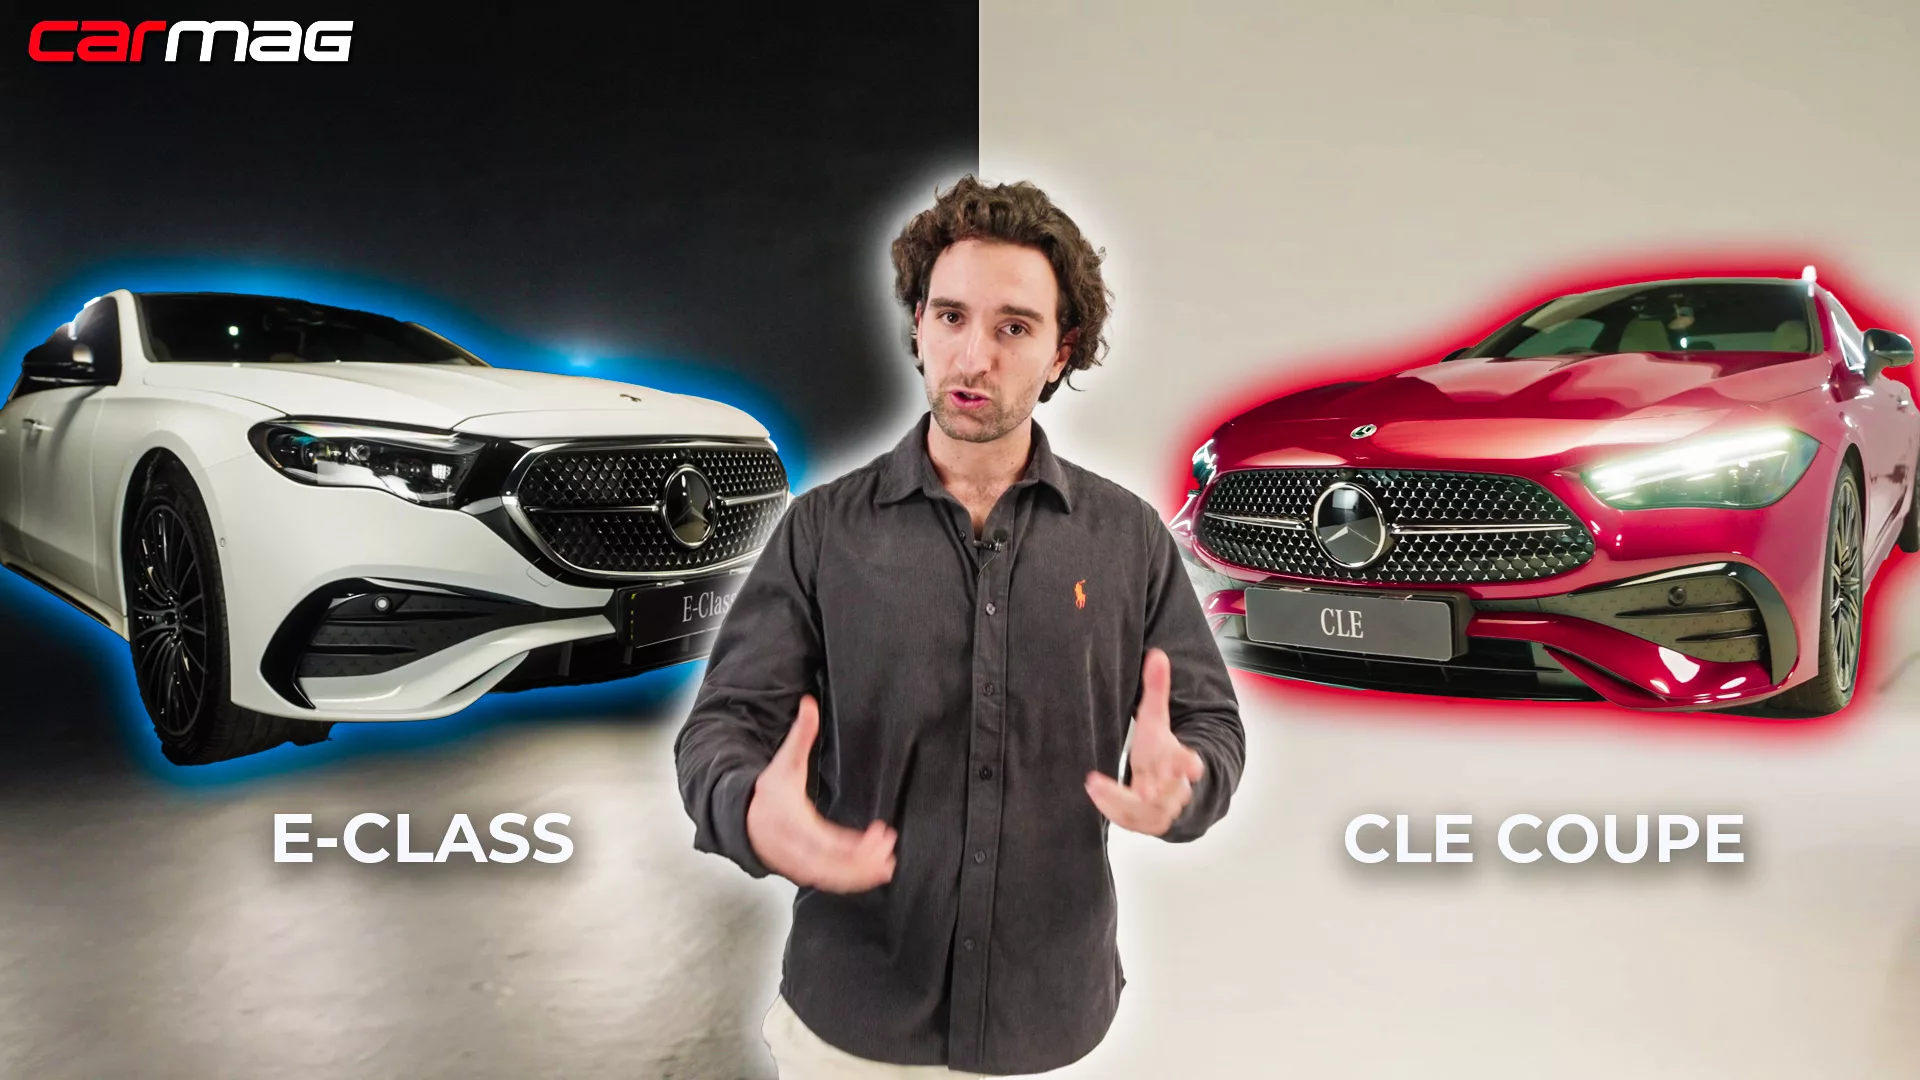 QUICK LOOK: Mercedes Benz E-Class and CLE Coupe